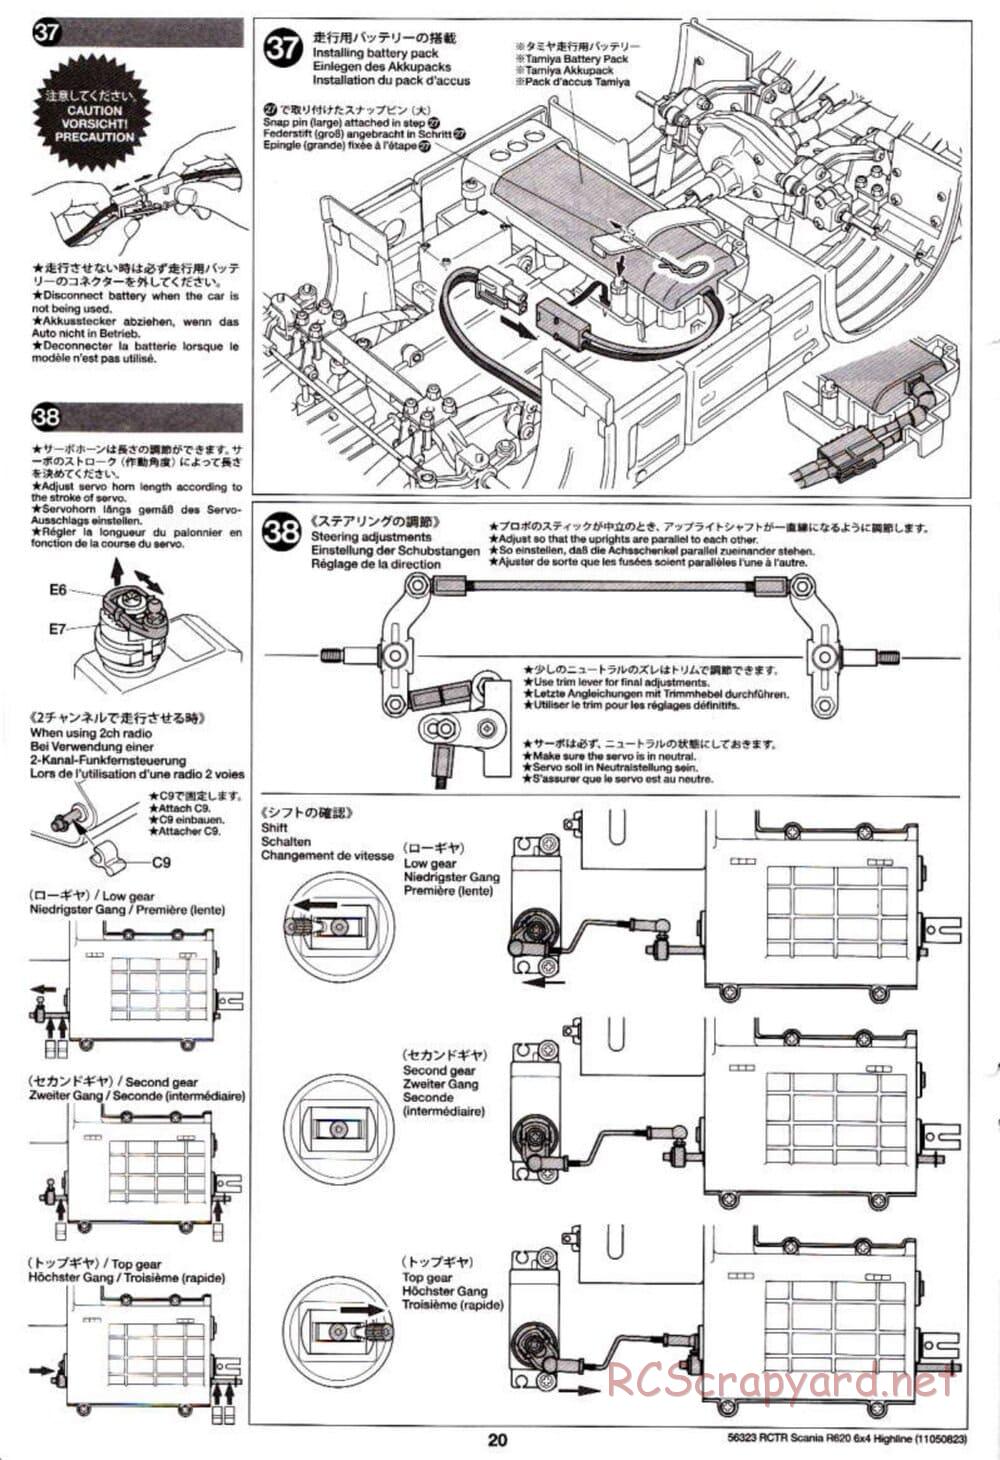 Tamiya - Scania R620 6x4 Highline Tractor Truck Chassis - Manual - Page 20